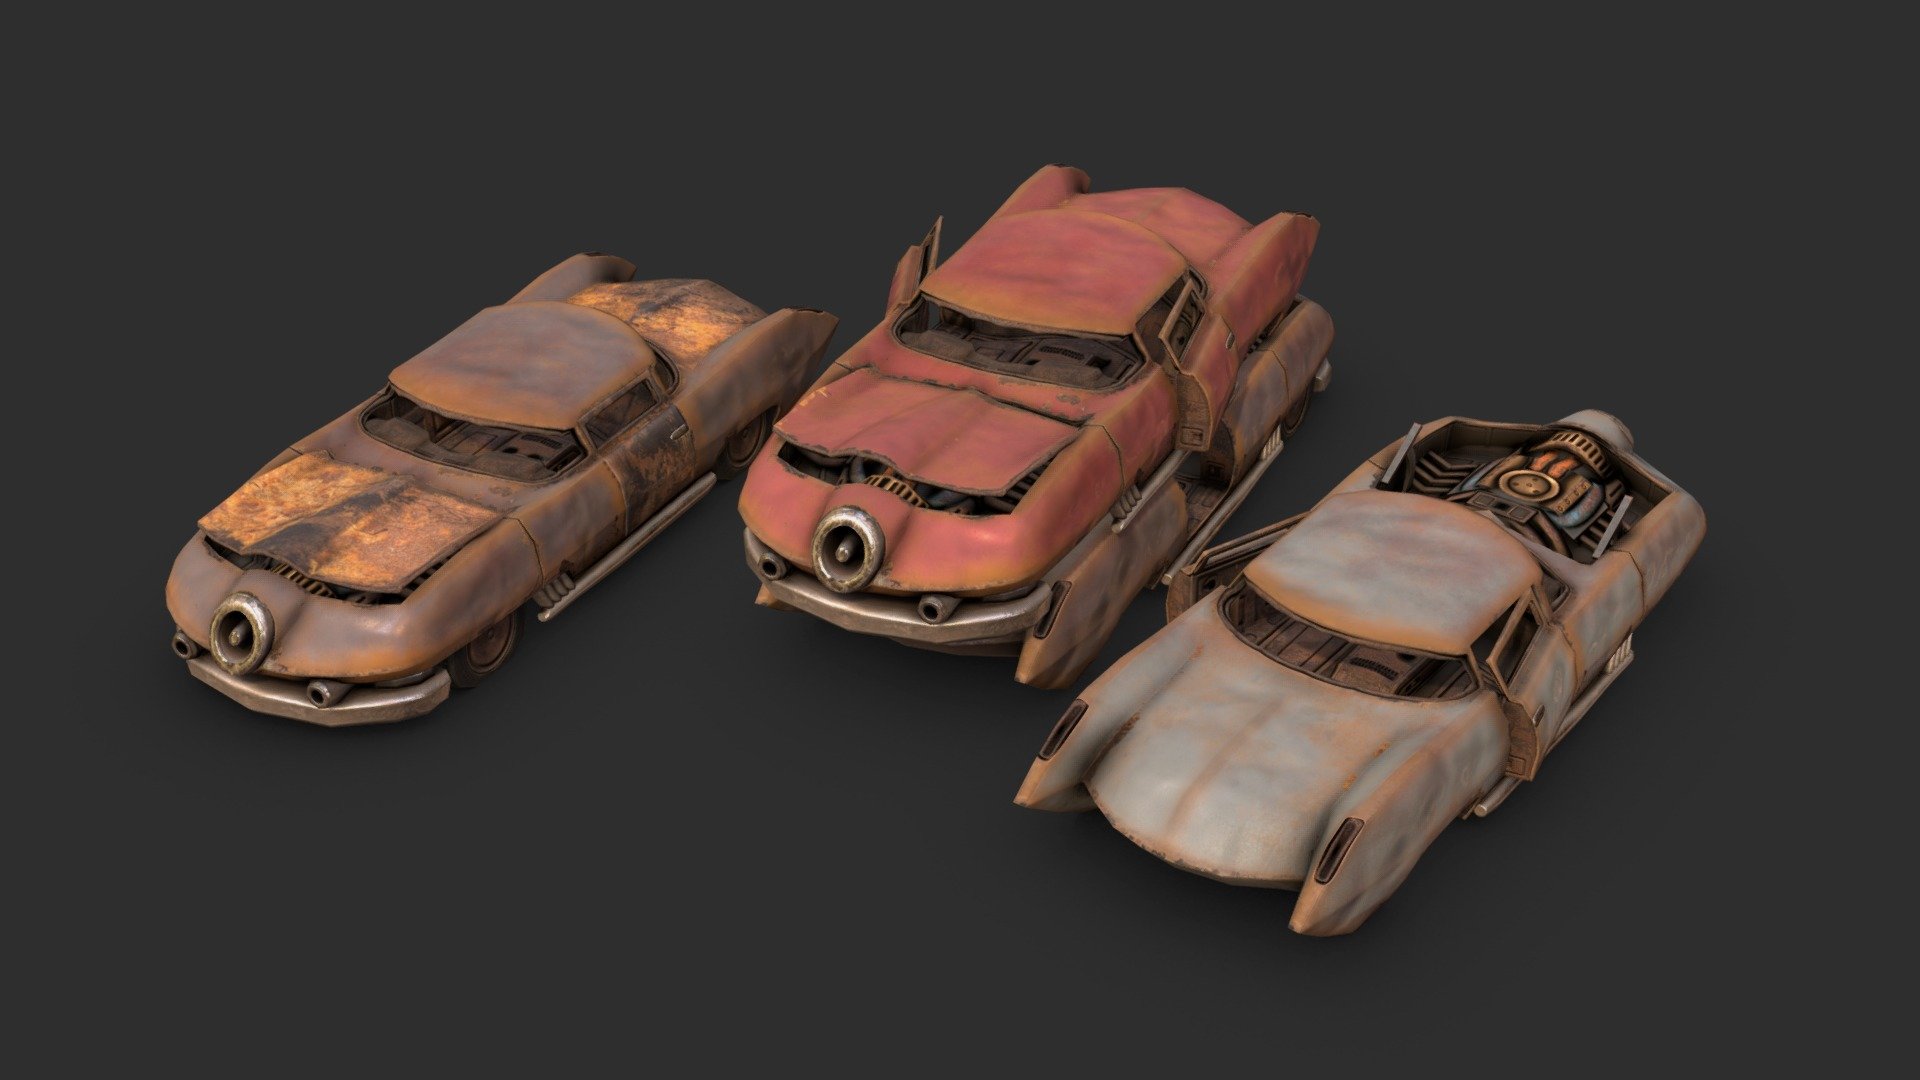 A remake of the original Fallout 1 Corvega automobile, made as something that might be able to be modded into the later Fallout games at some point.

The original sprite for comparison: 

Made with 3DSMax and Substance Painter 3d model